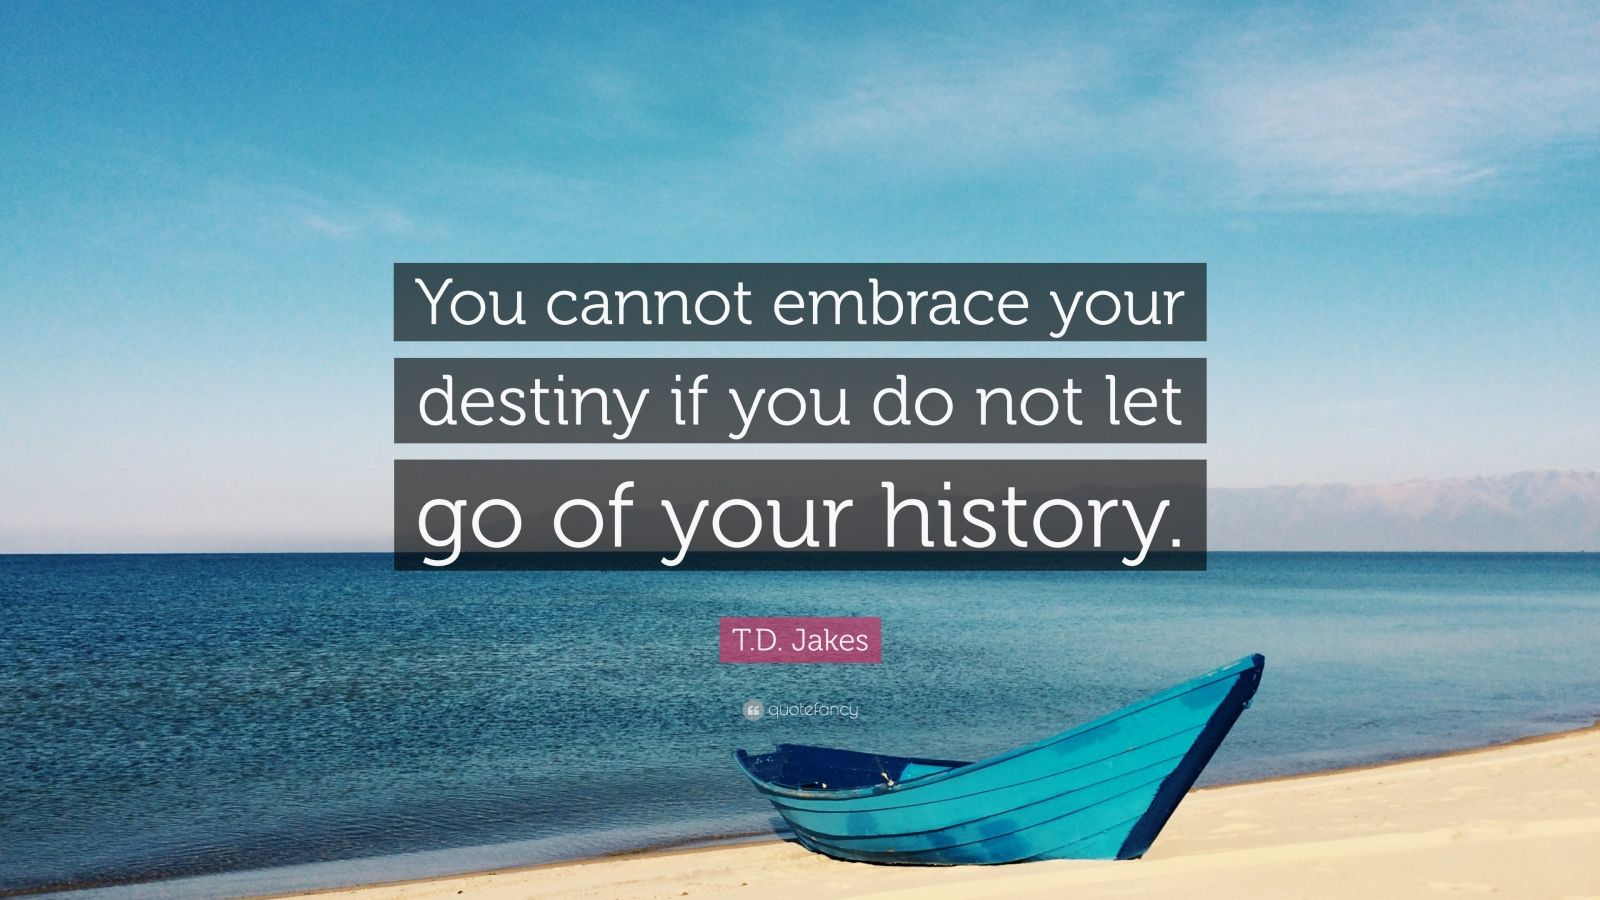 T.D. Jakes Quote “You cannot embrace your destiny if you